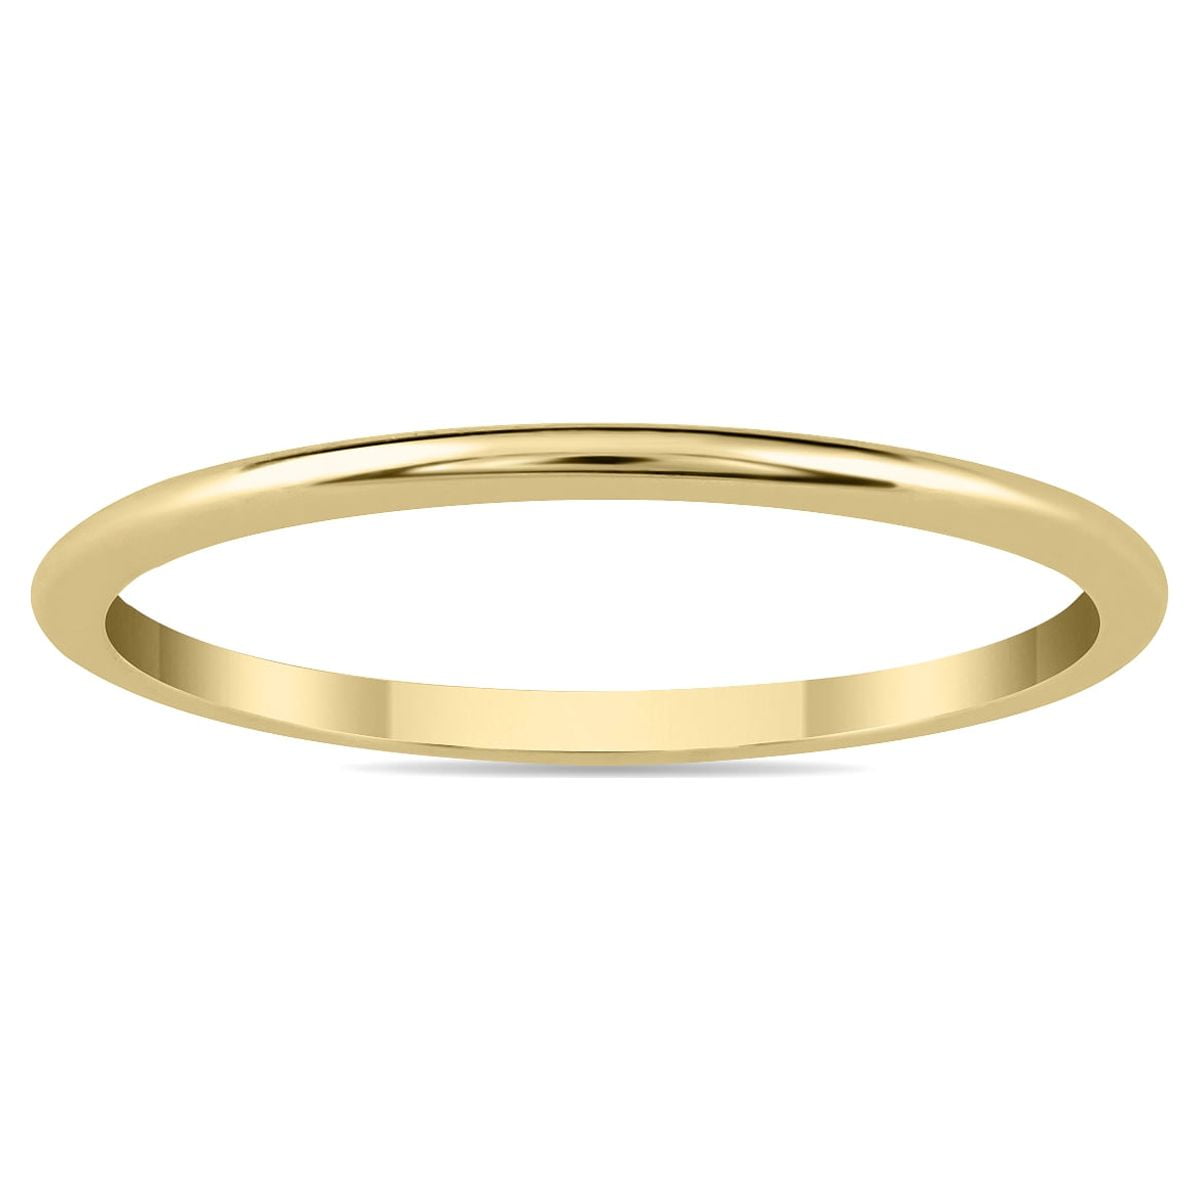 1mm Thin Domed Wedding Band in 14K Yellow Gold-